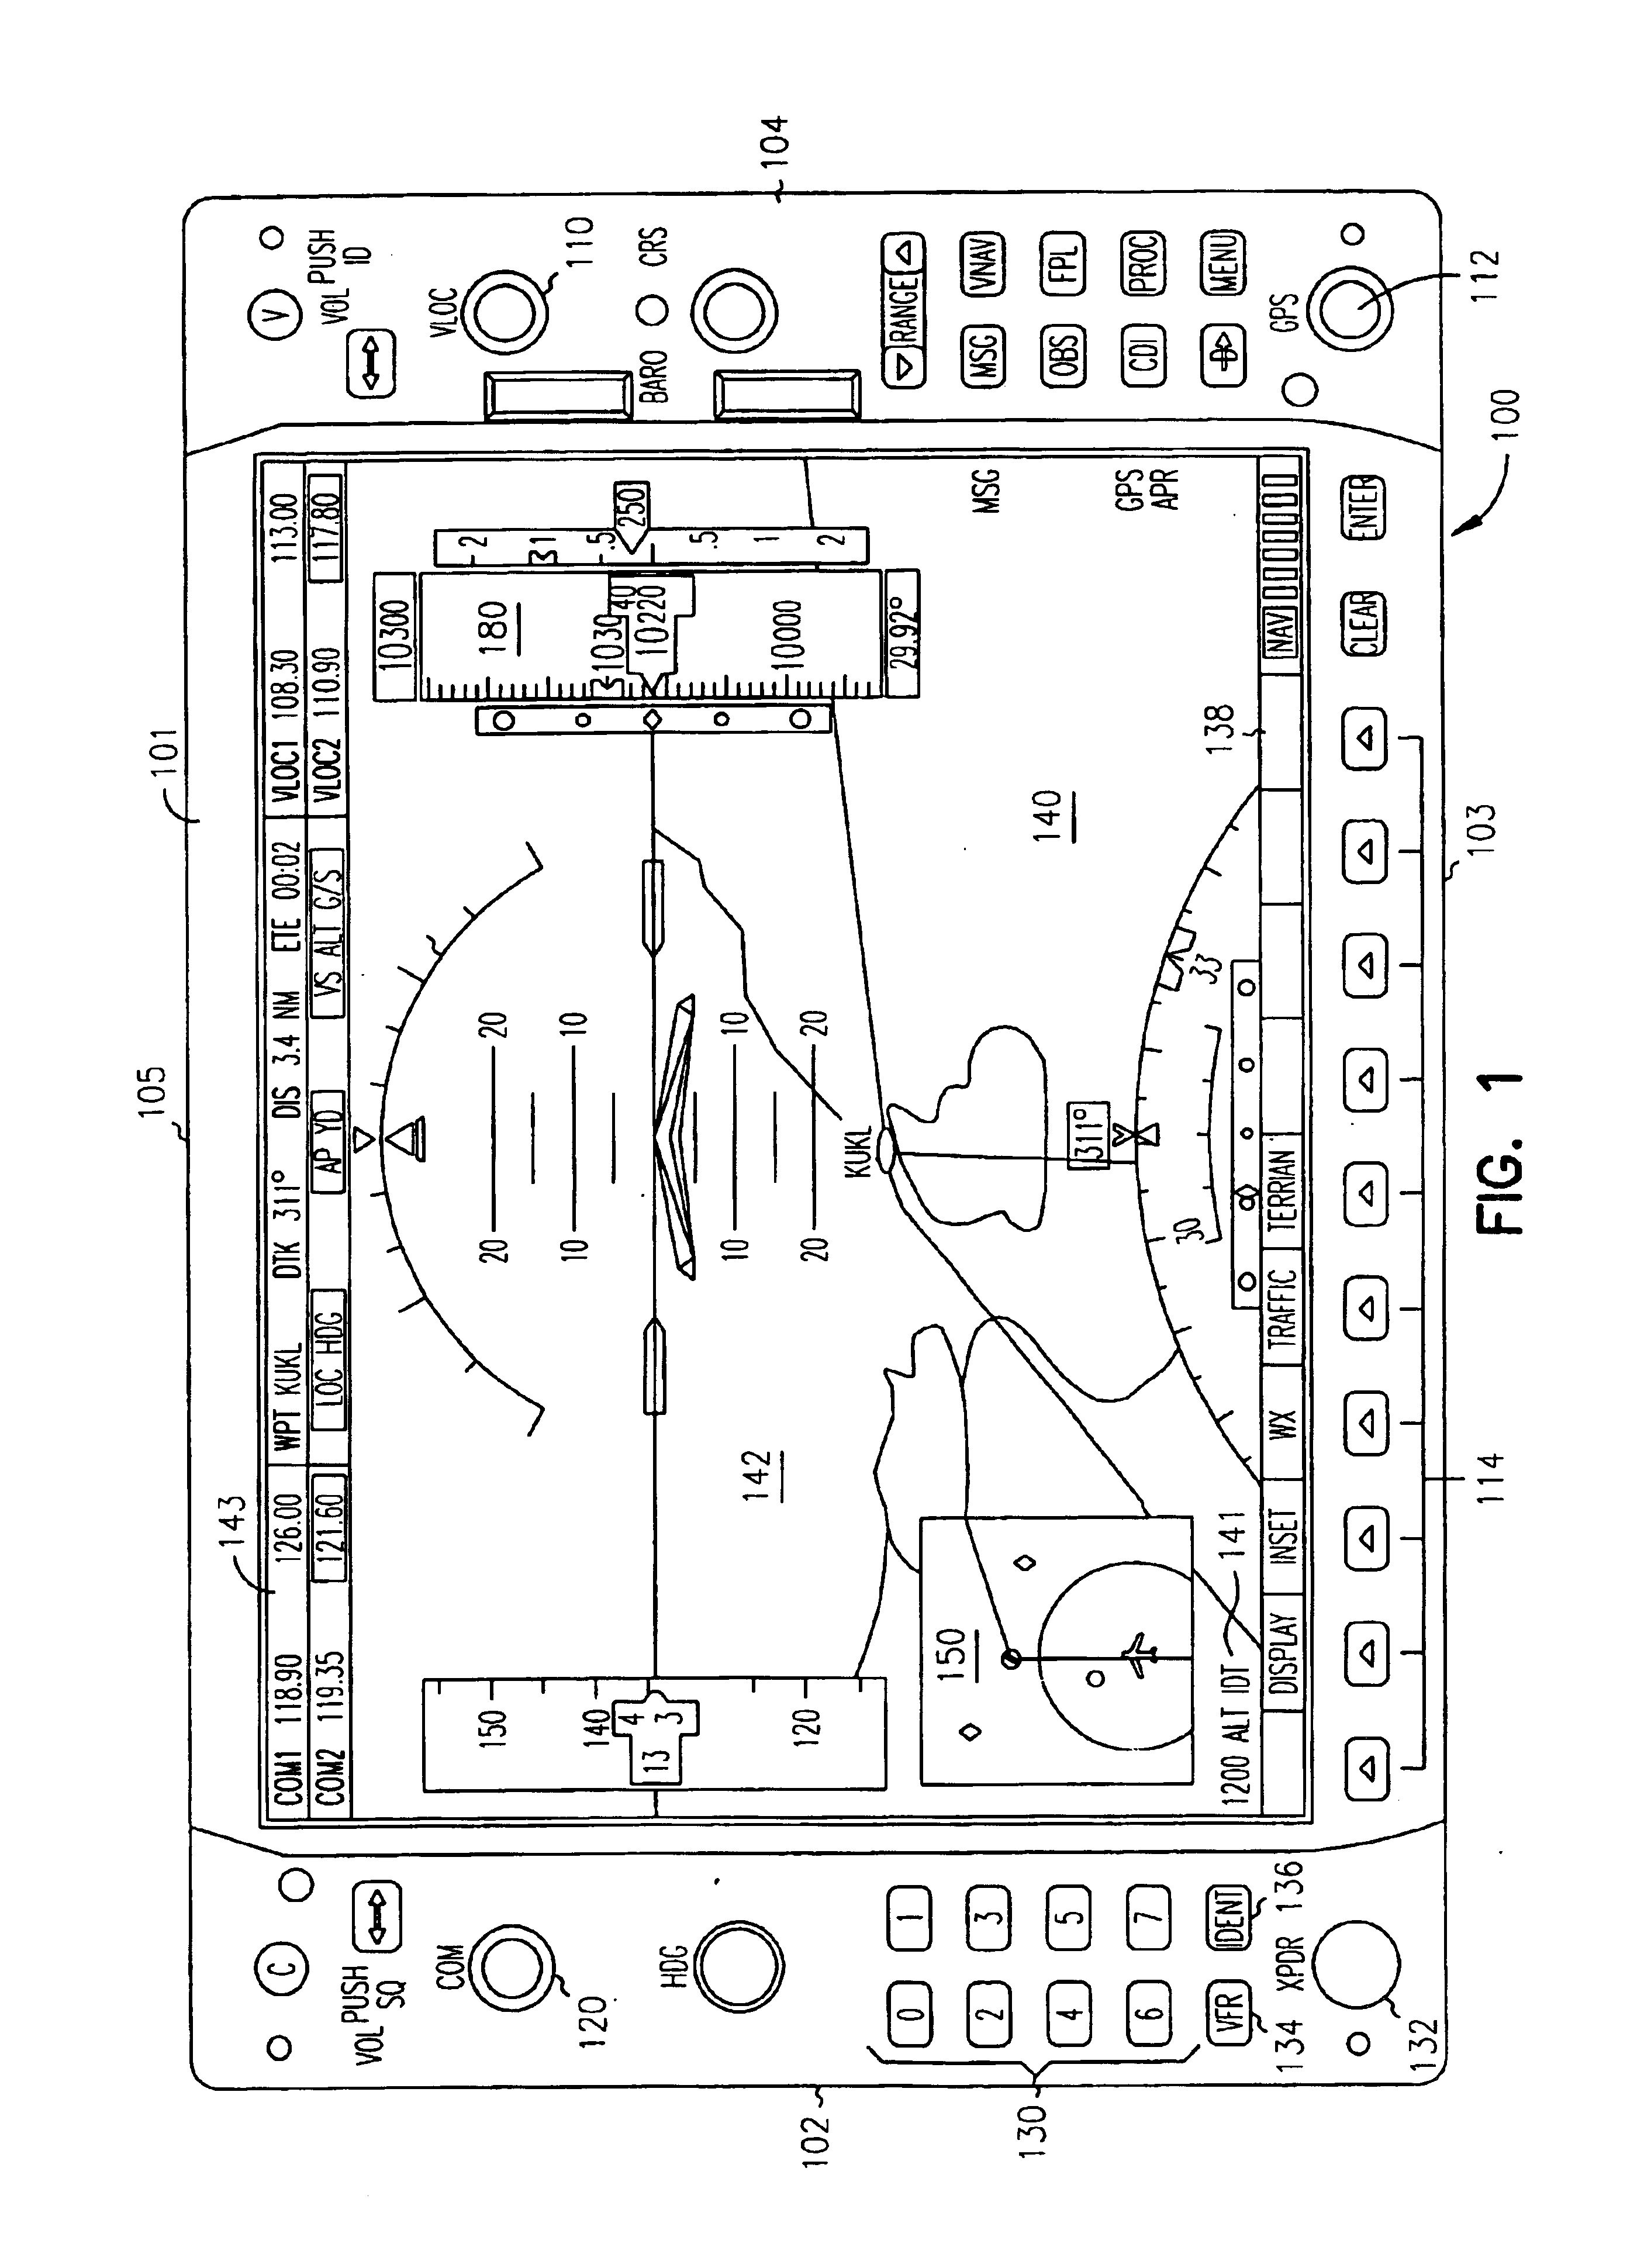 Customizable cockpit display systems and methods of customizing the presentation of cockpit data